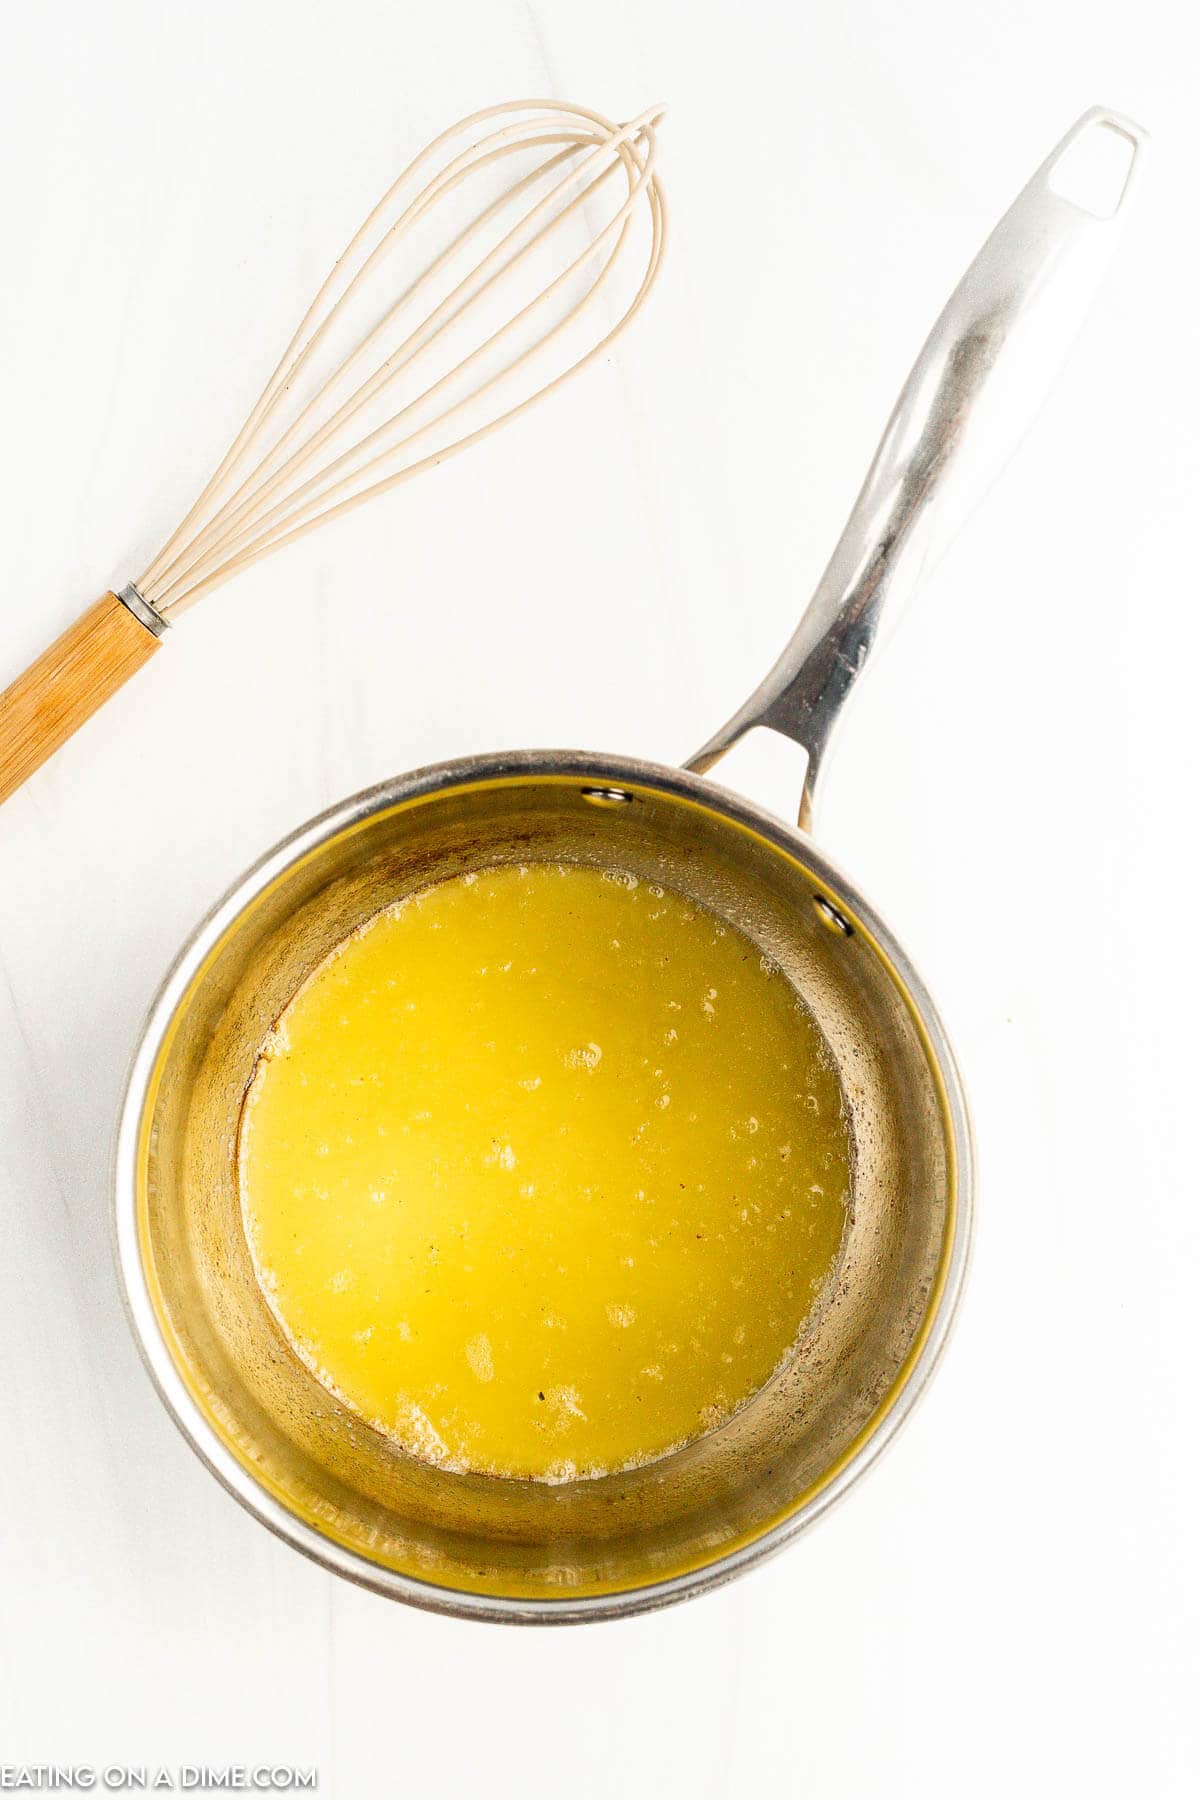 Melted butter in a saucepan